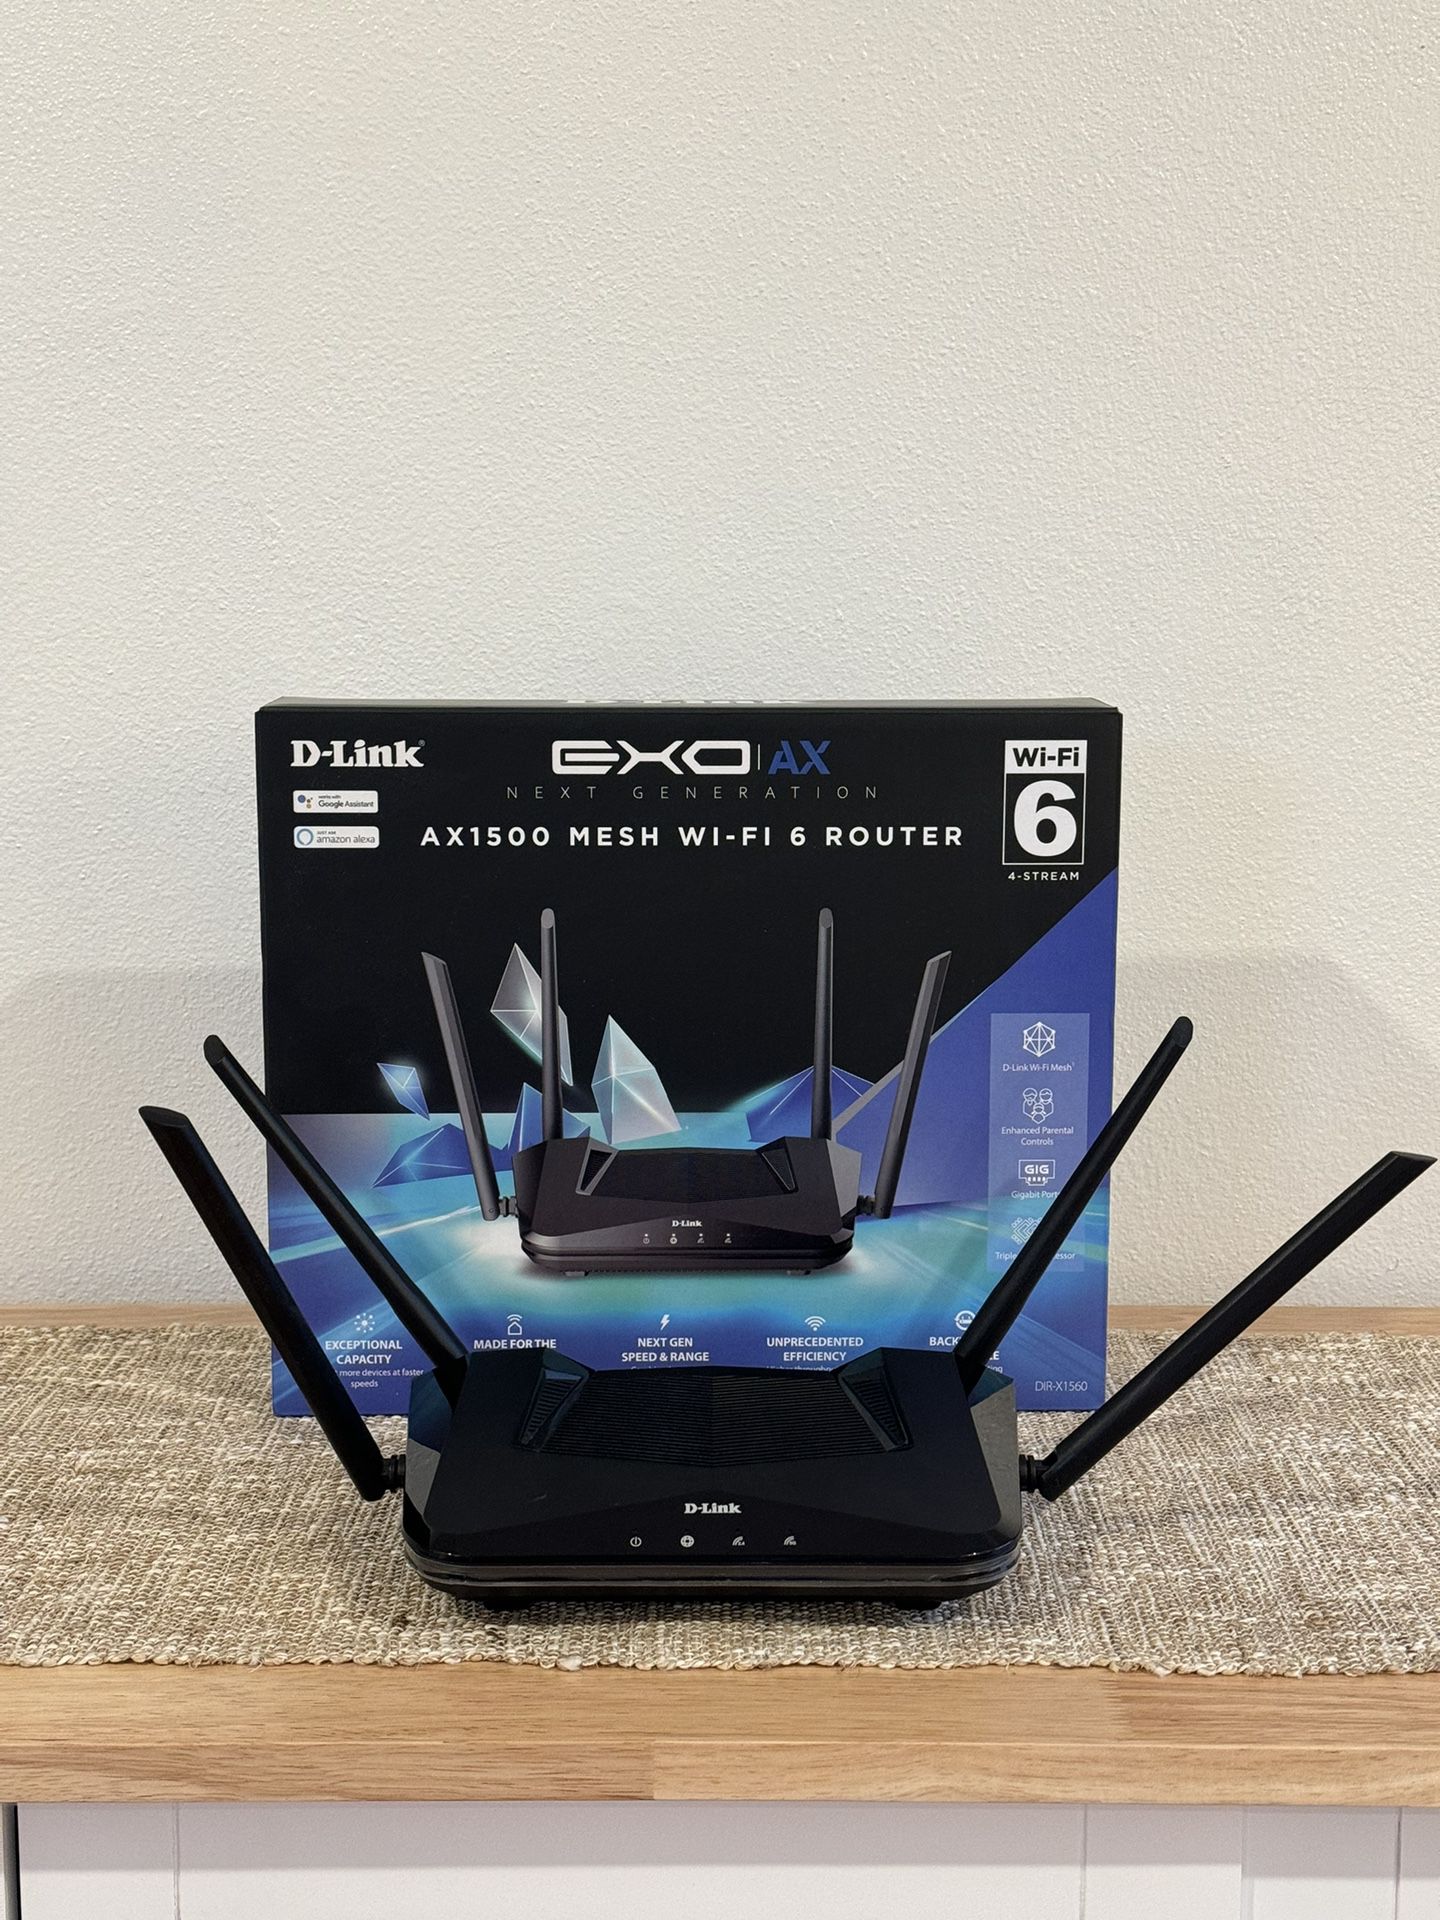 D-Link AX1500 MESH WI-FI 6 ROUTER